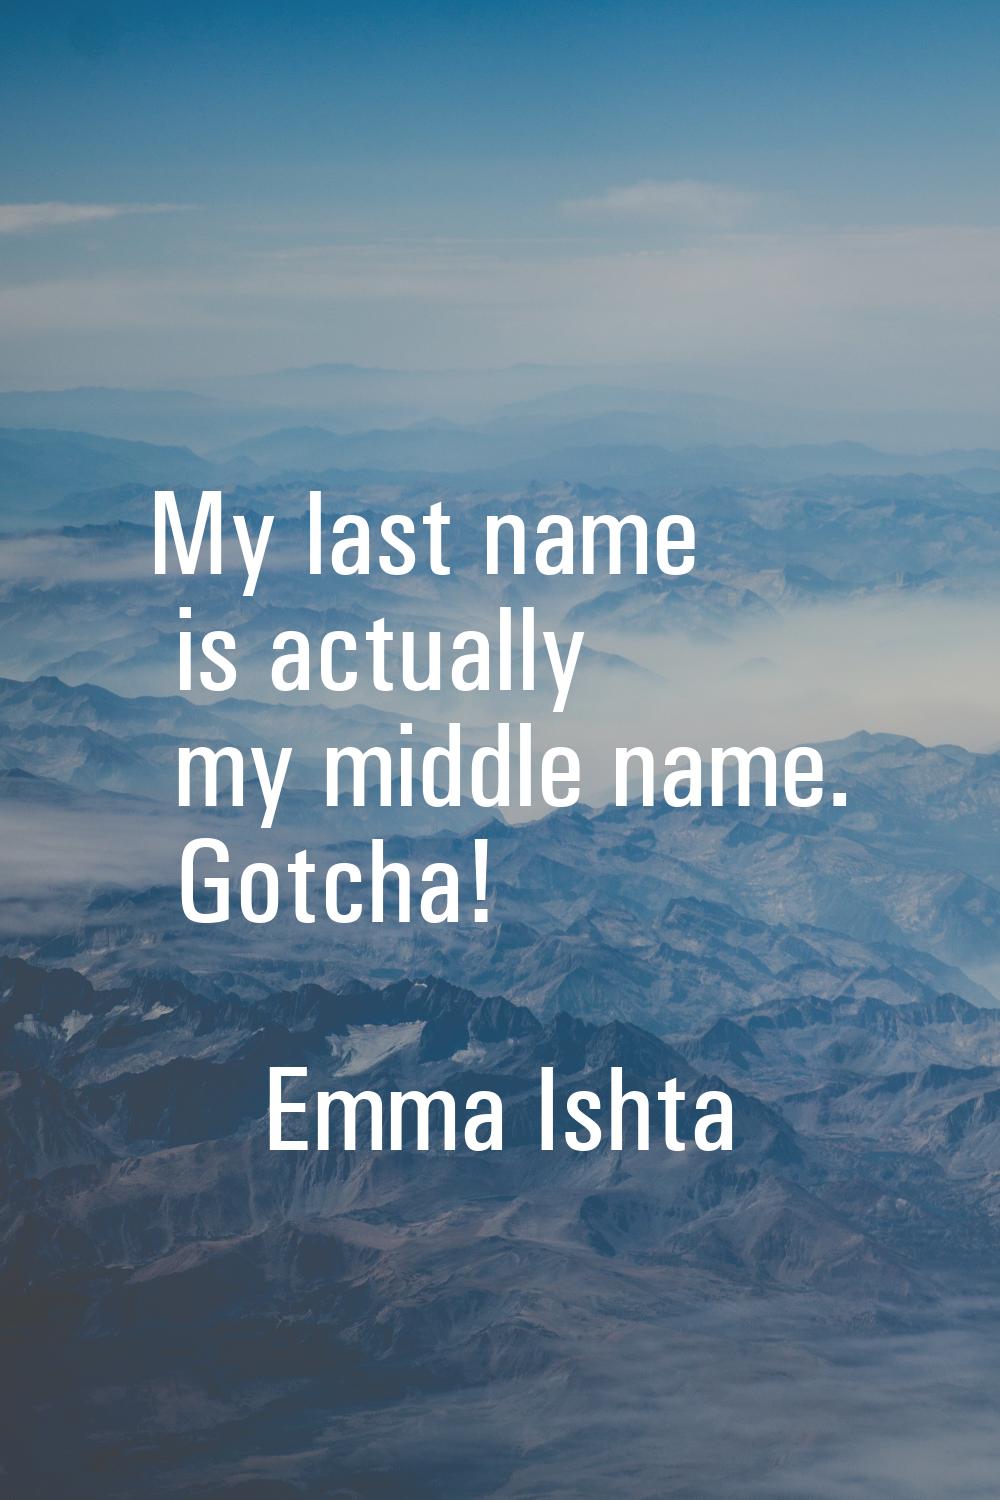 My last name is actually my middle name. Gotcha!